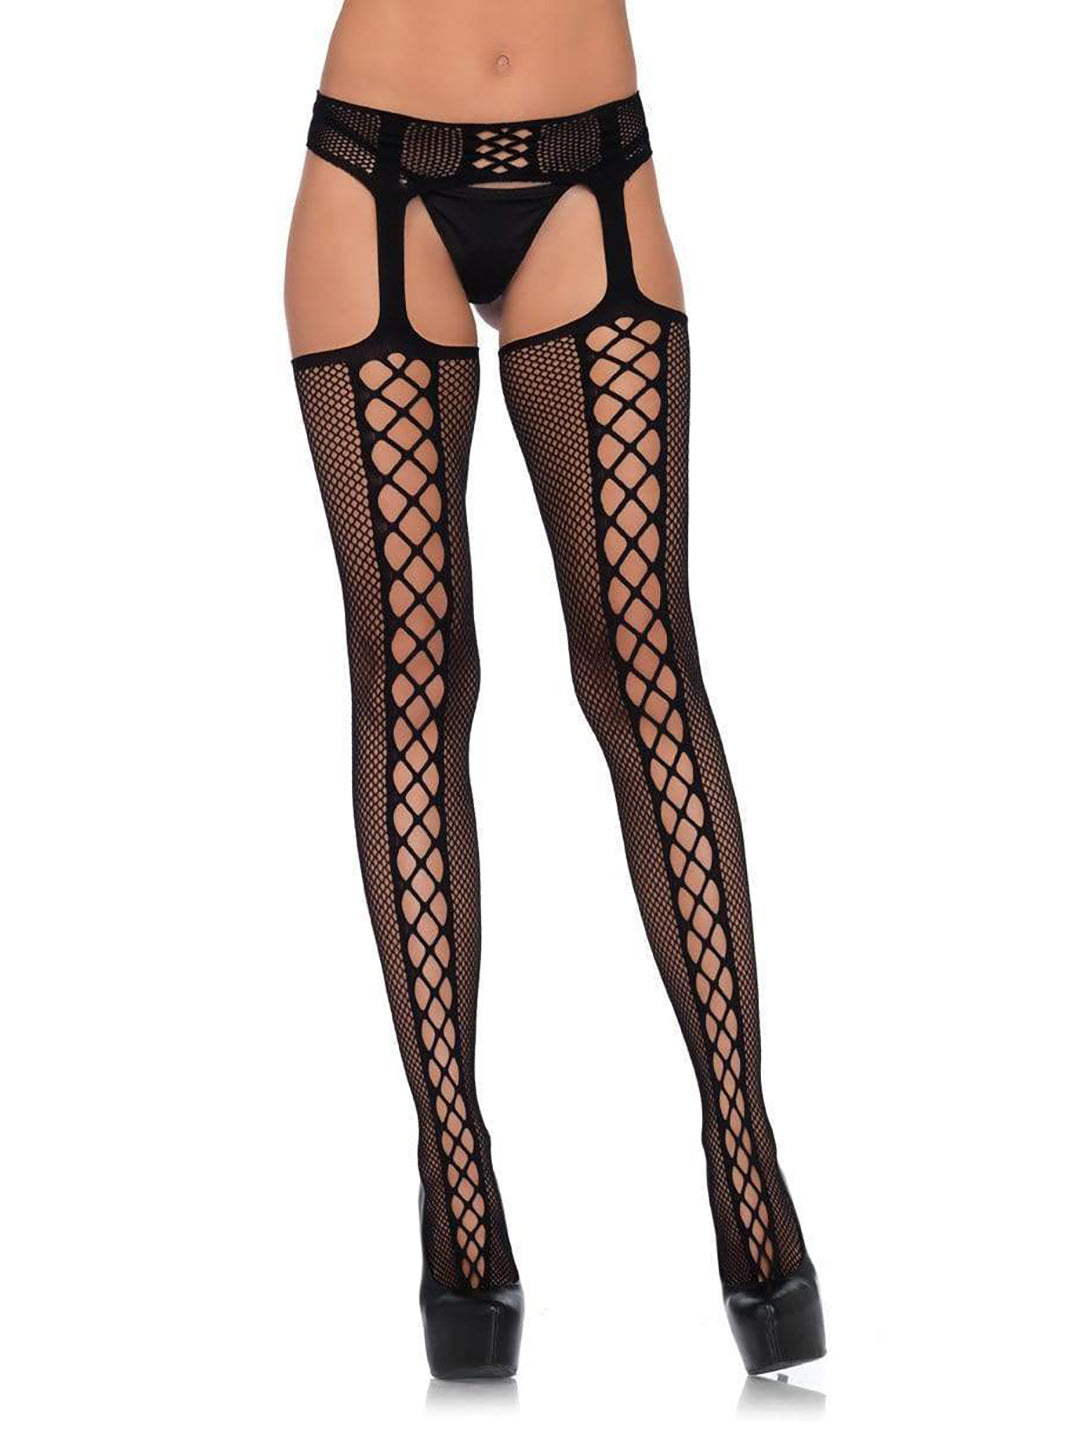 Dual Net Stockings with Attached Garter Belt and Backseam Detail